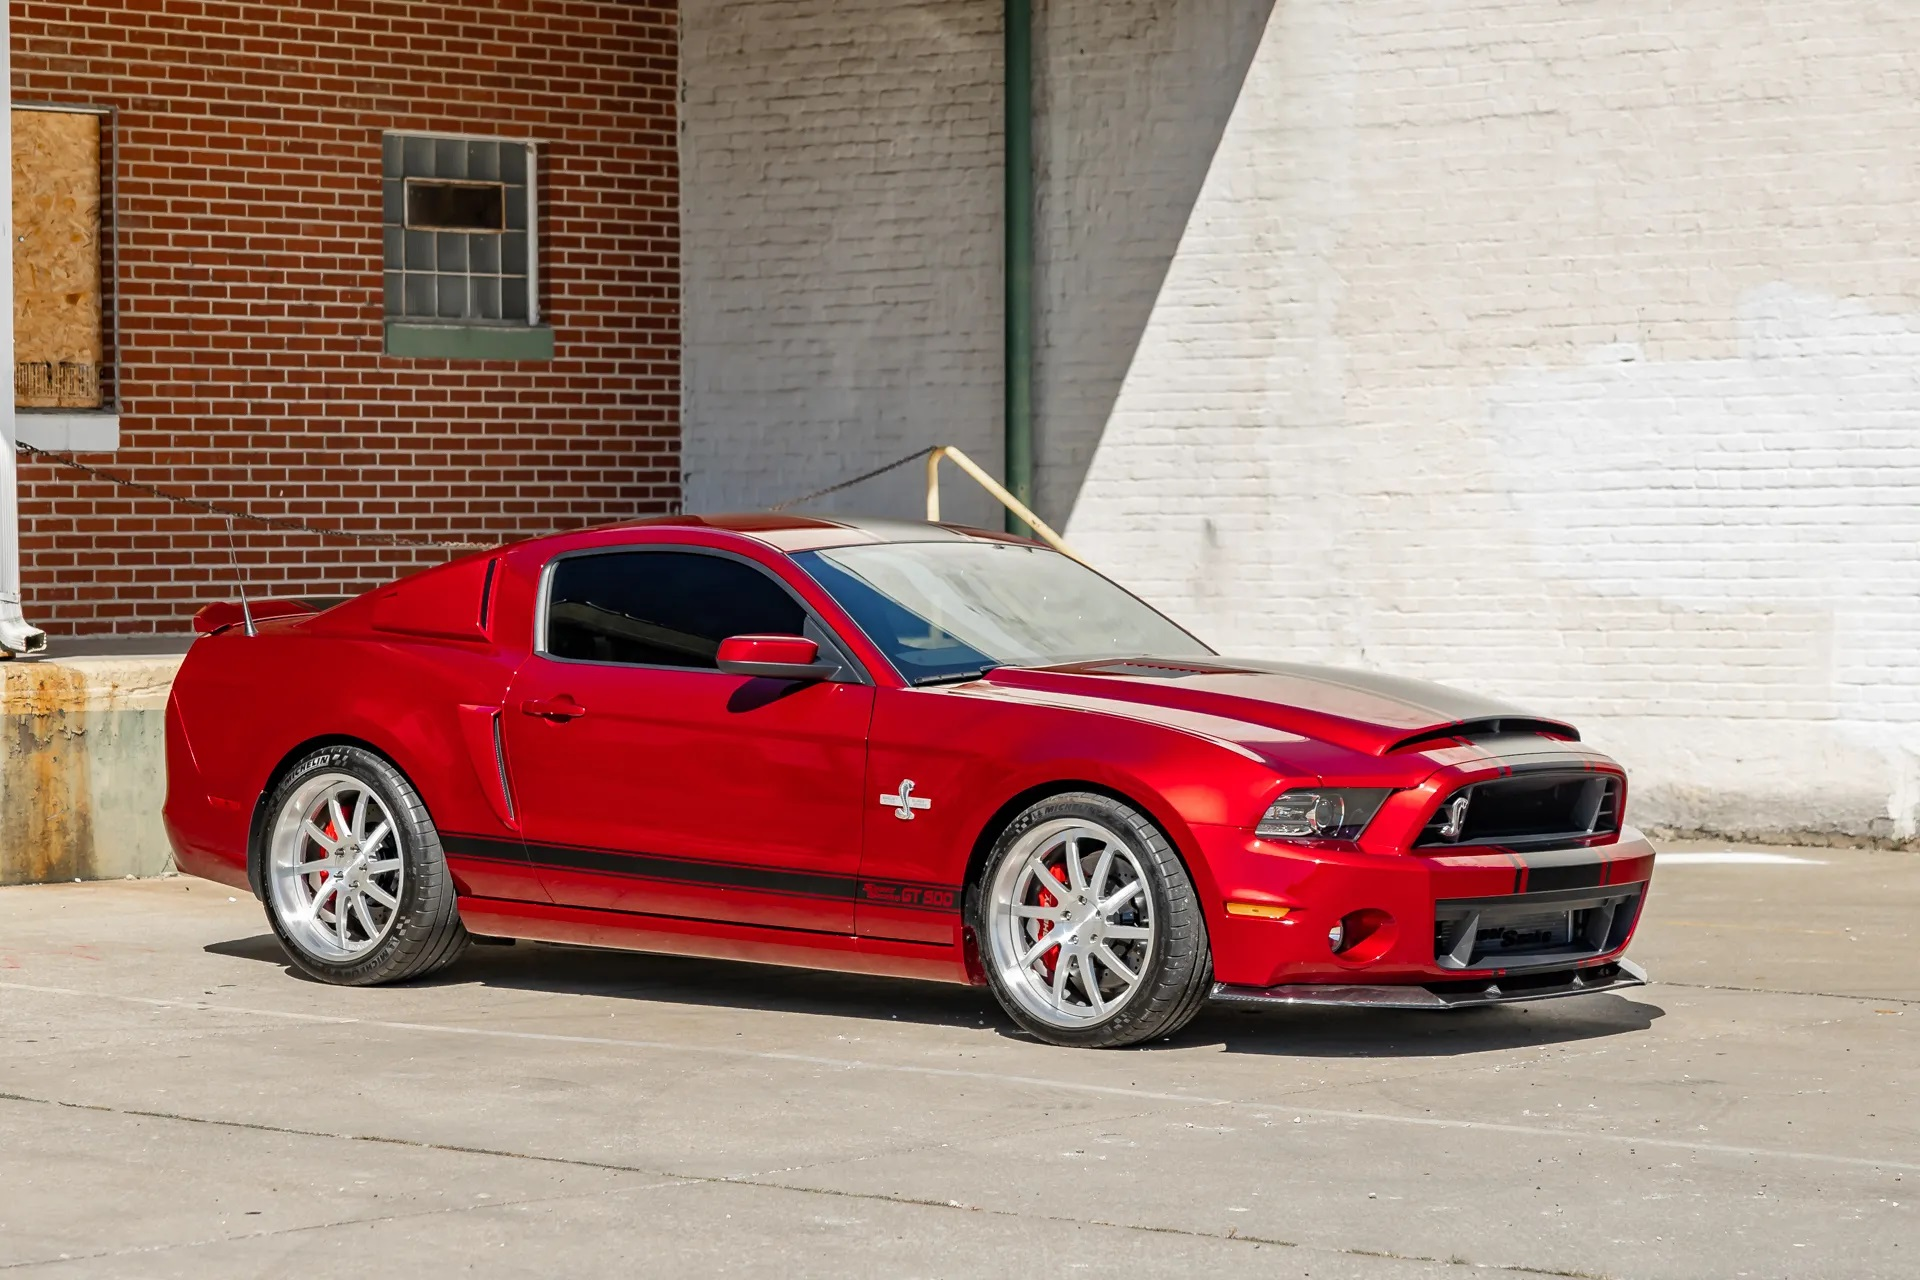 Mustang Of The Day: 2014 Ford Mustang Shelby GT500 Super Snake